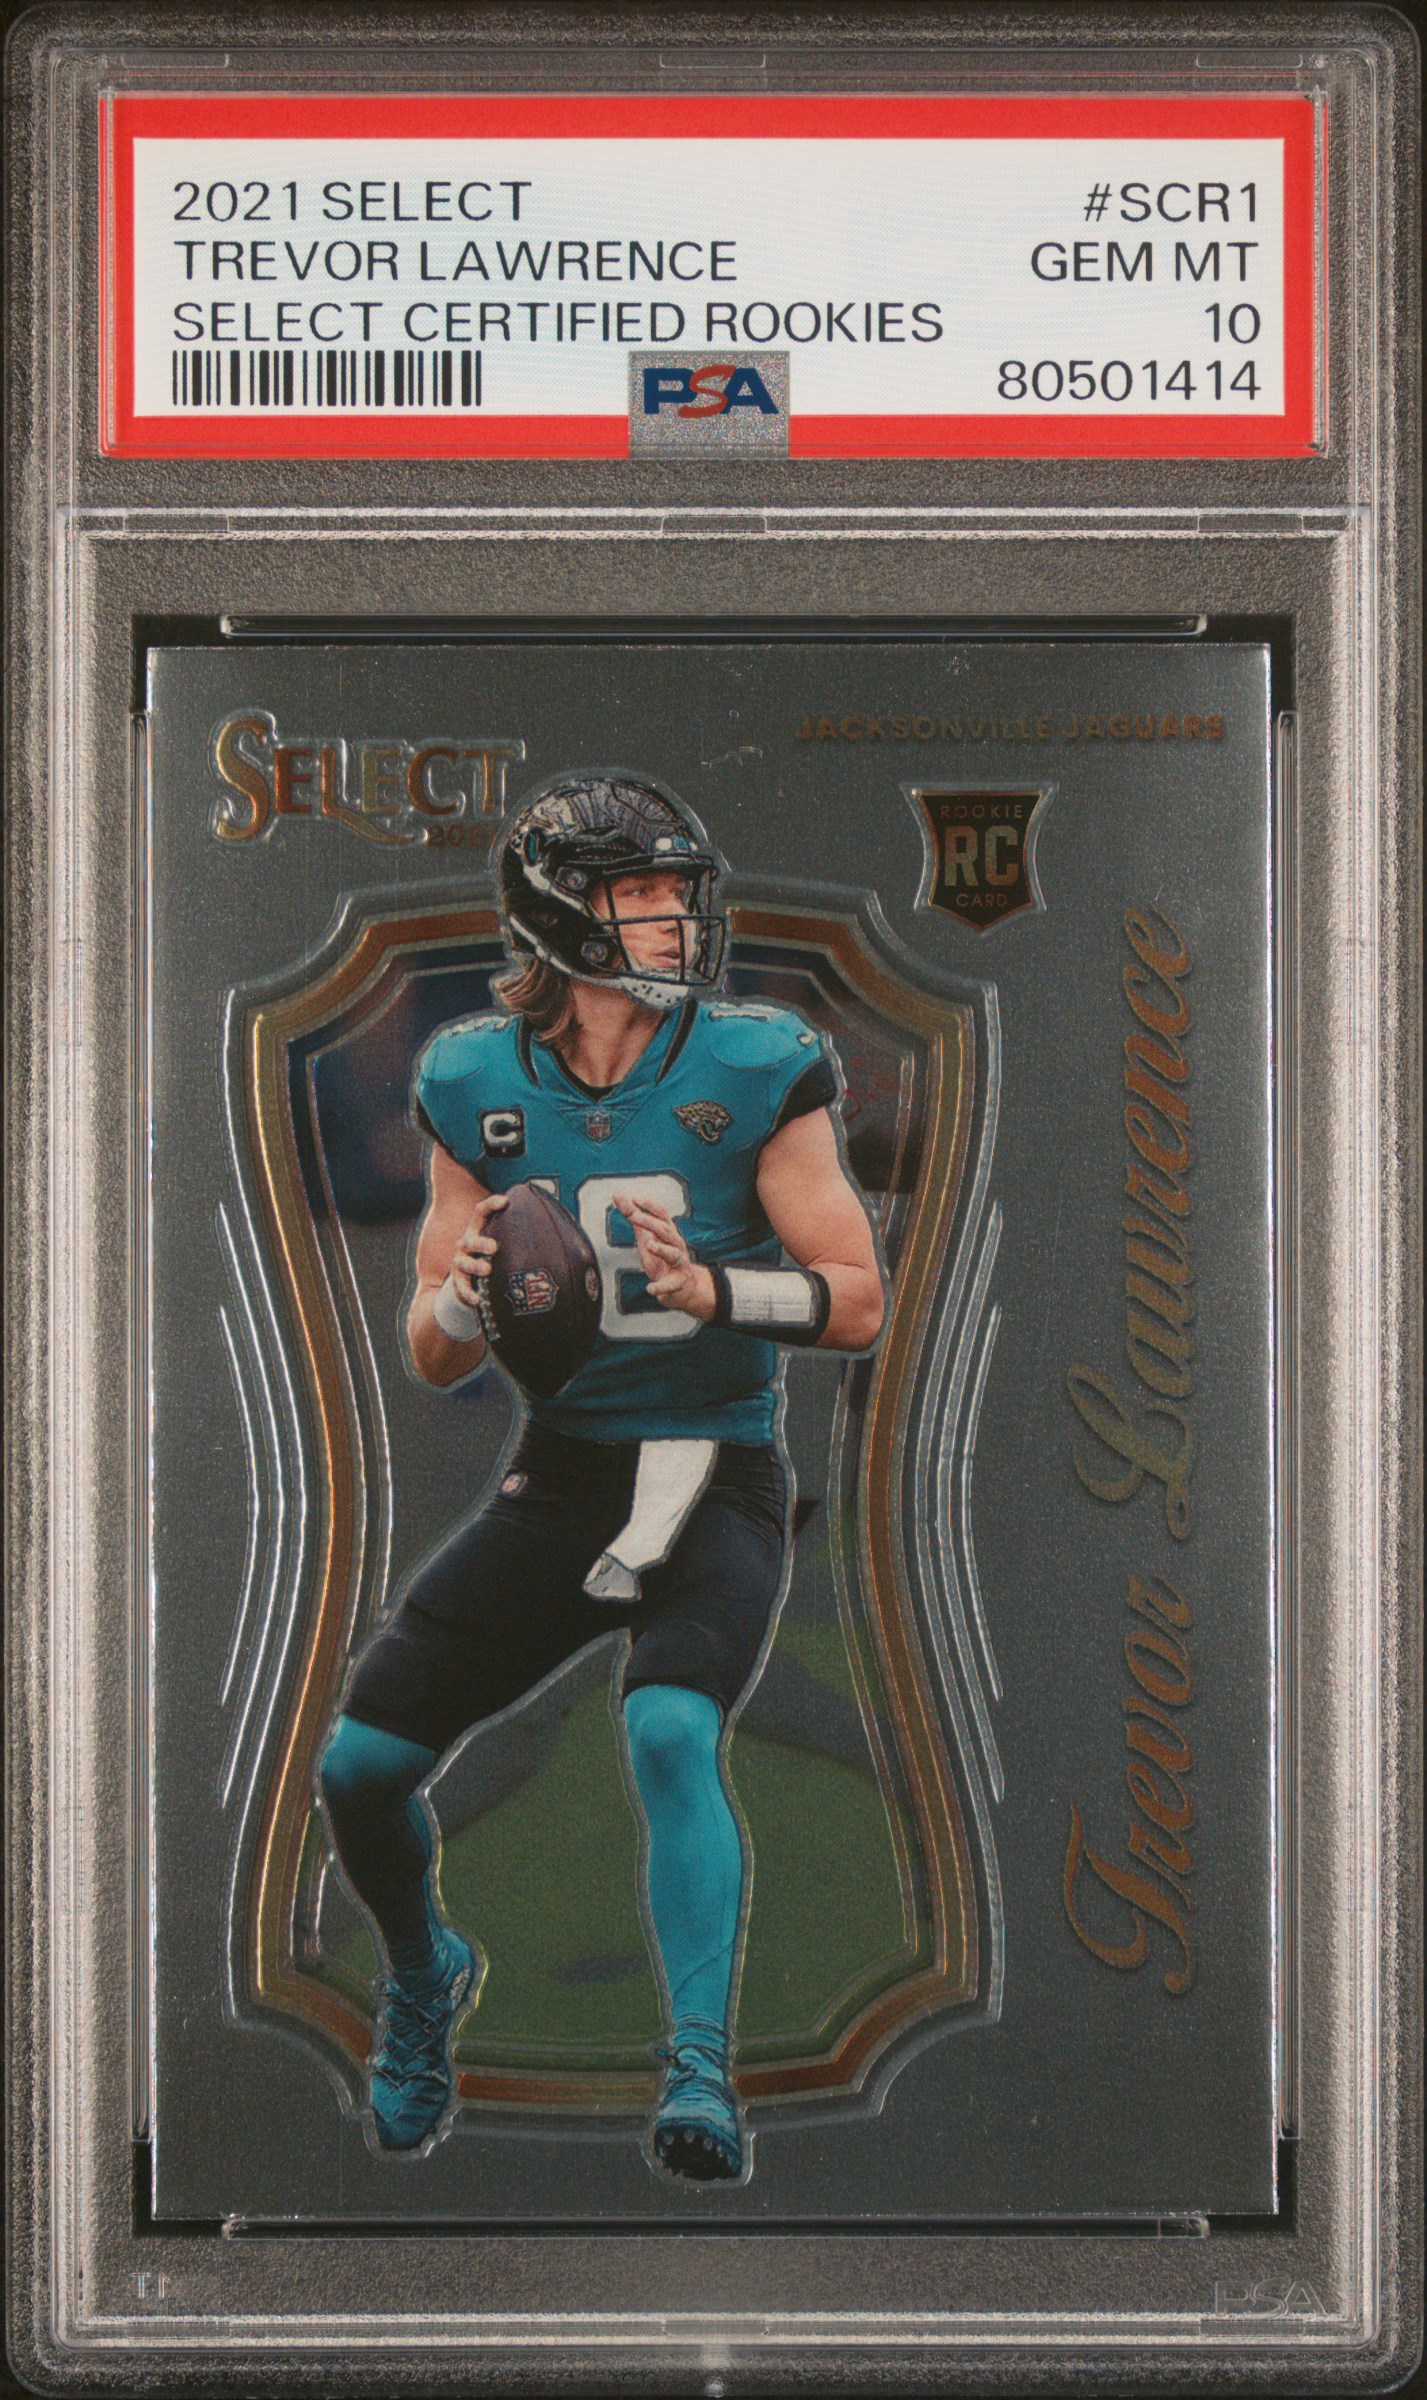 2021 Panini Select Select Certified Rookies #SCR1 Trevor Lawrence Rookie Card – PSA GEM MT 10